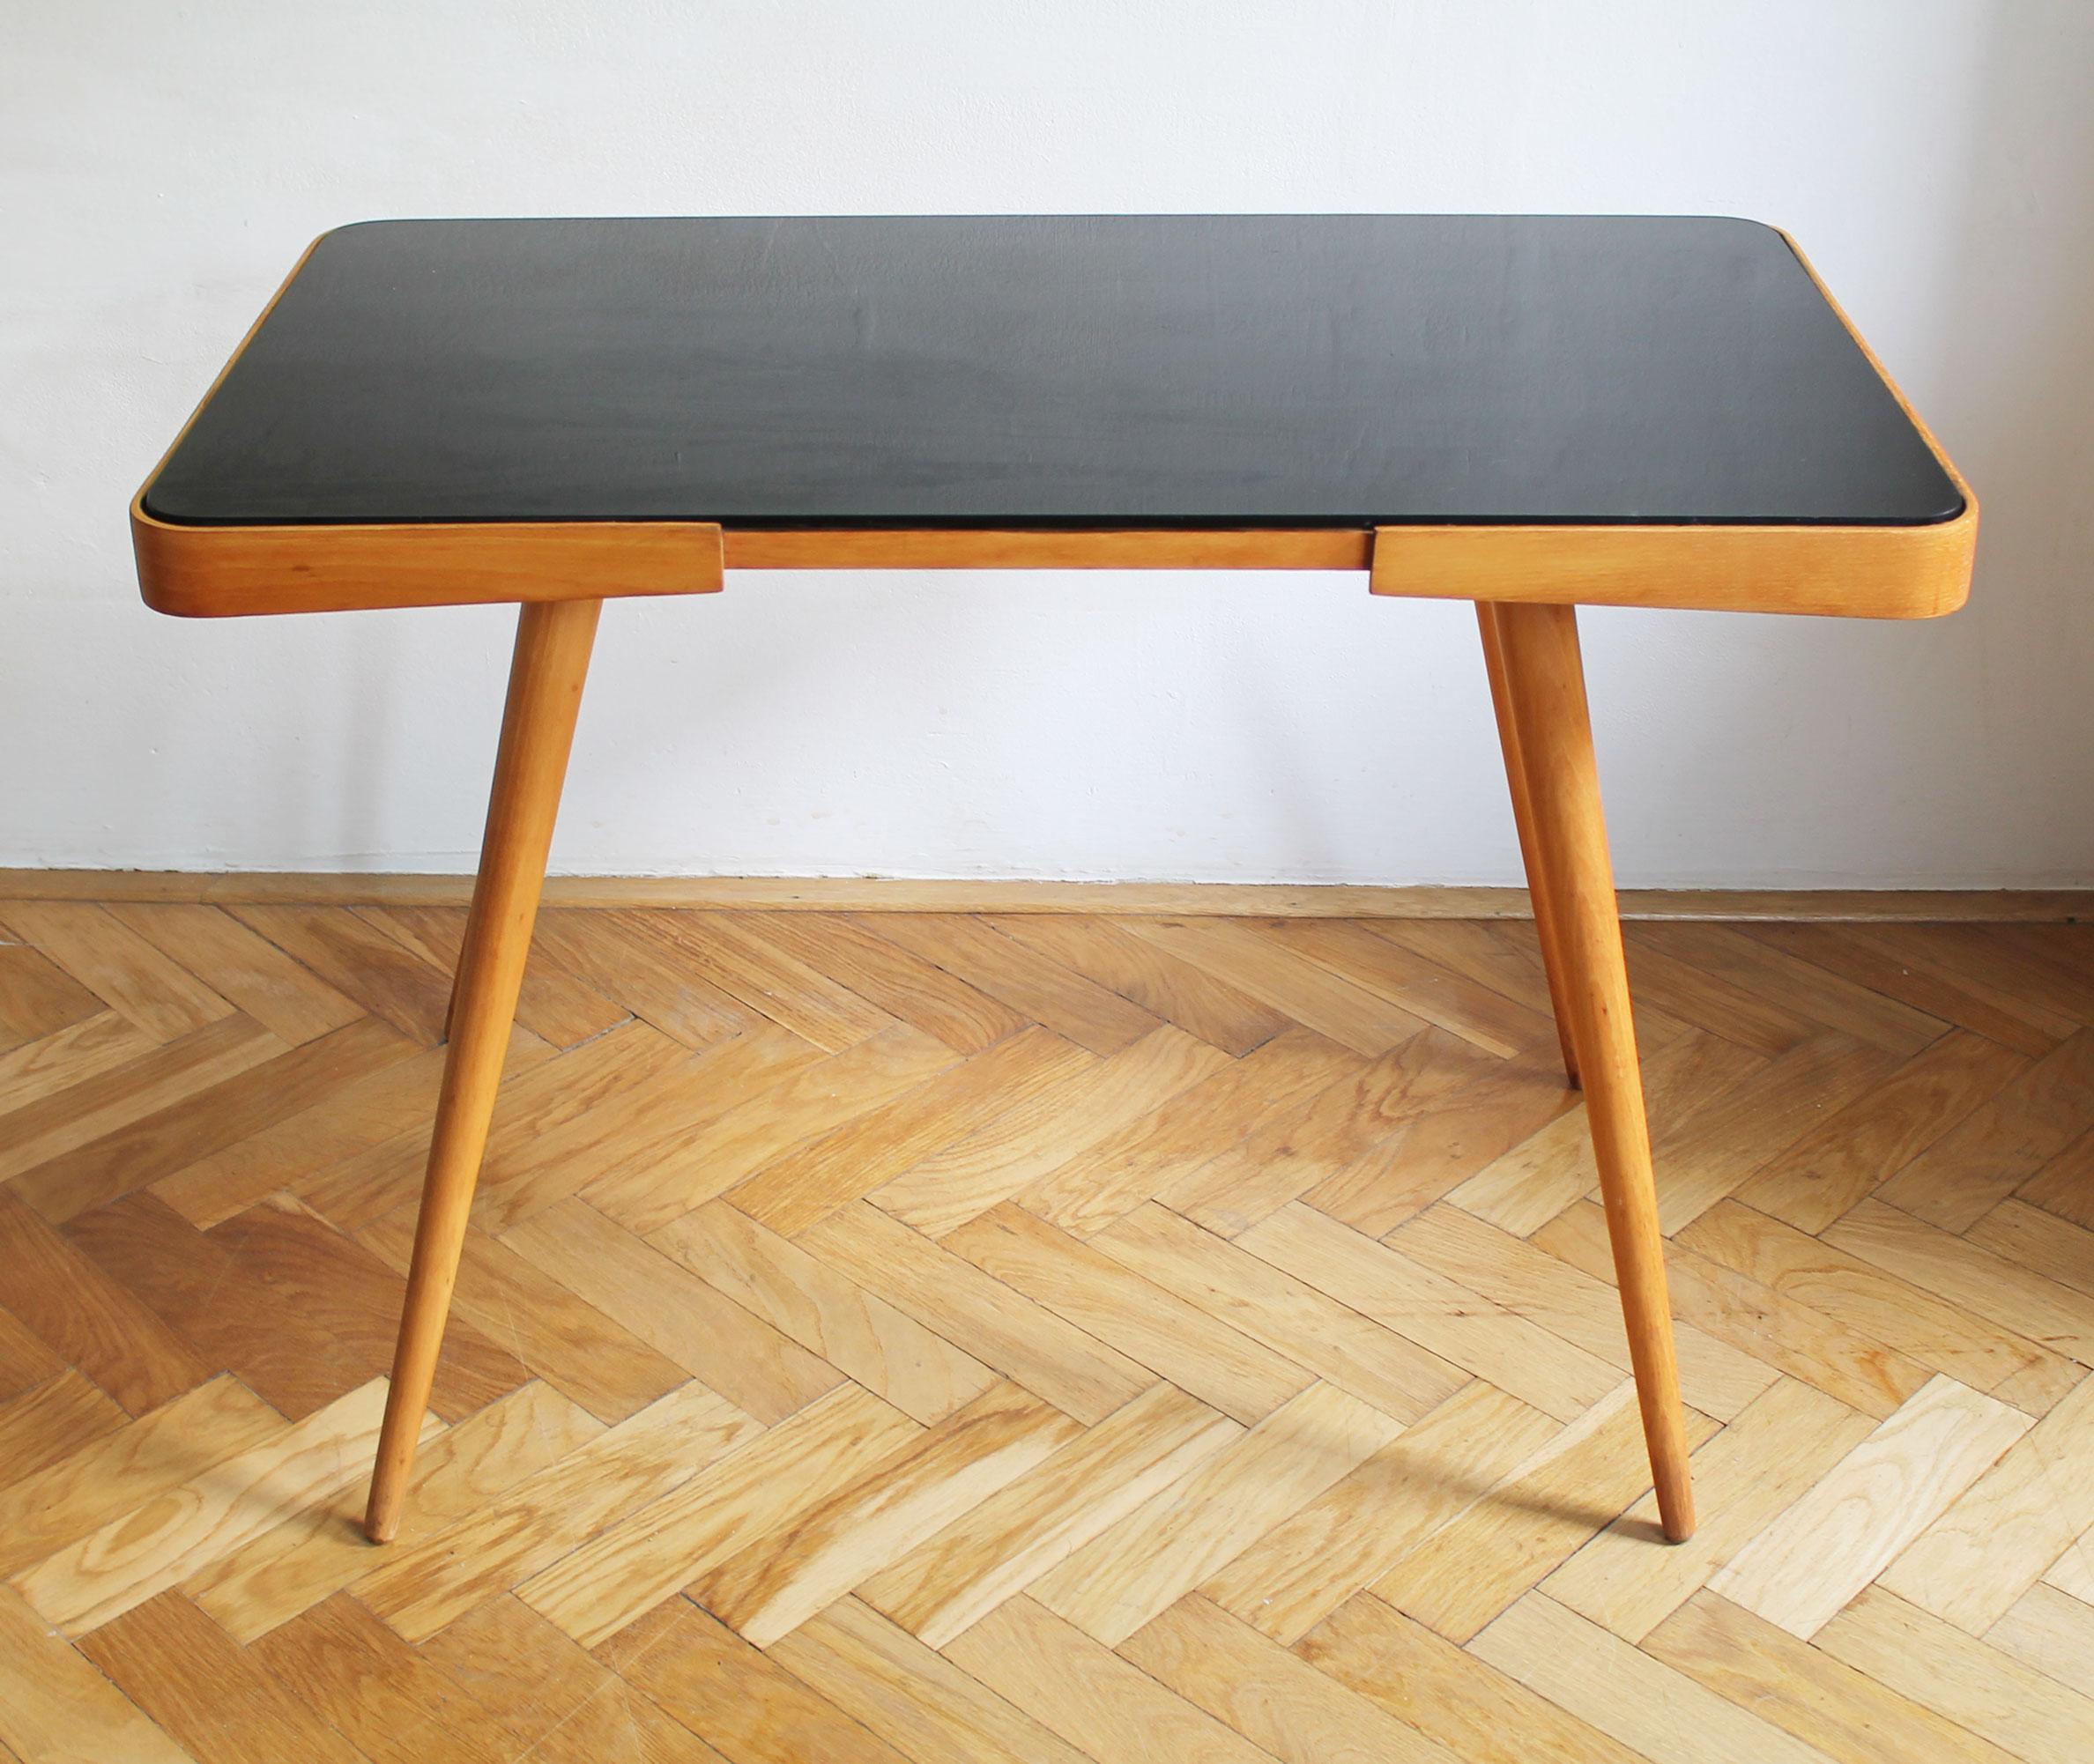 This is another design classic of the so called 'Brussels Style', a popular design style adopted by many Czech households. 

This Coffee Table is believed to be created by a celebrated Czech furniture designer Jiri Jiroutek (1928-2023) and was